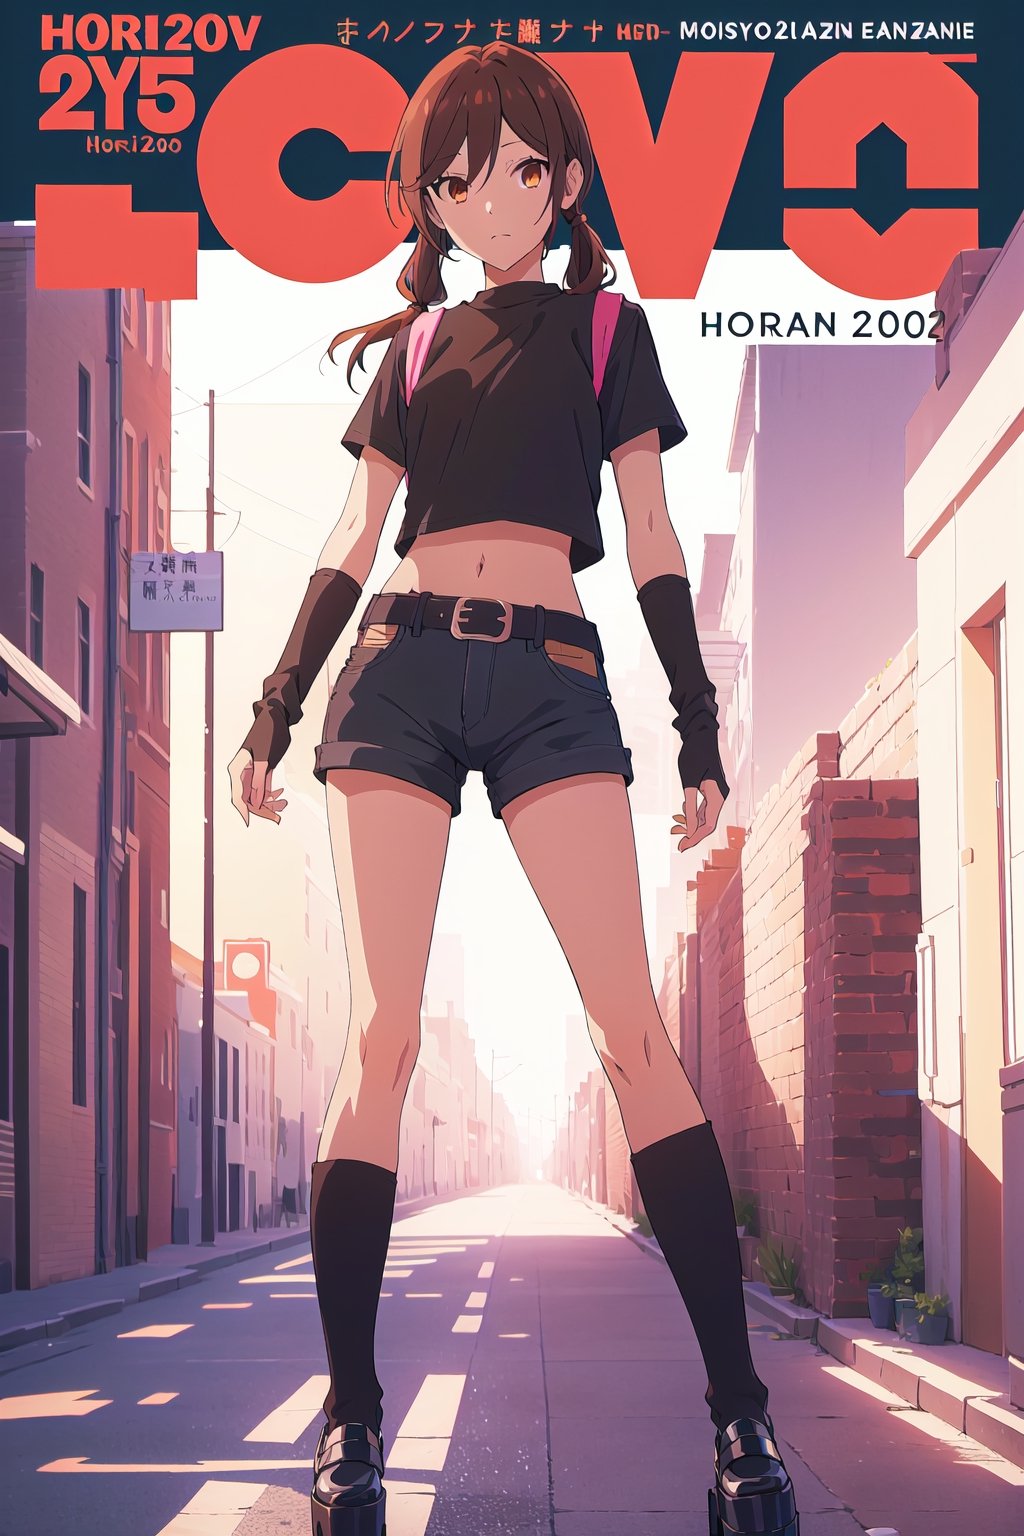 2000s fashion,horimiya_hori,1girl,20 years old,brown eyes,magazine cover,modeling pose, standing,foreground,dominant,pov_eye_contact,arm warmers.black jean shorts, big belt, platform_footwear, crop top, leg warmers, twin_tails, photoshoot background